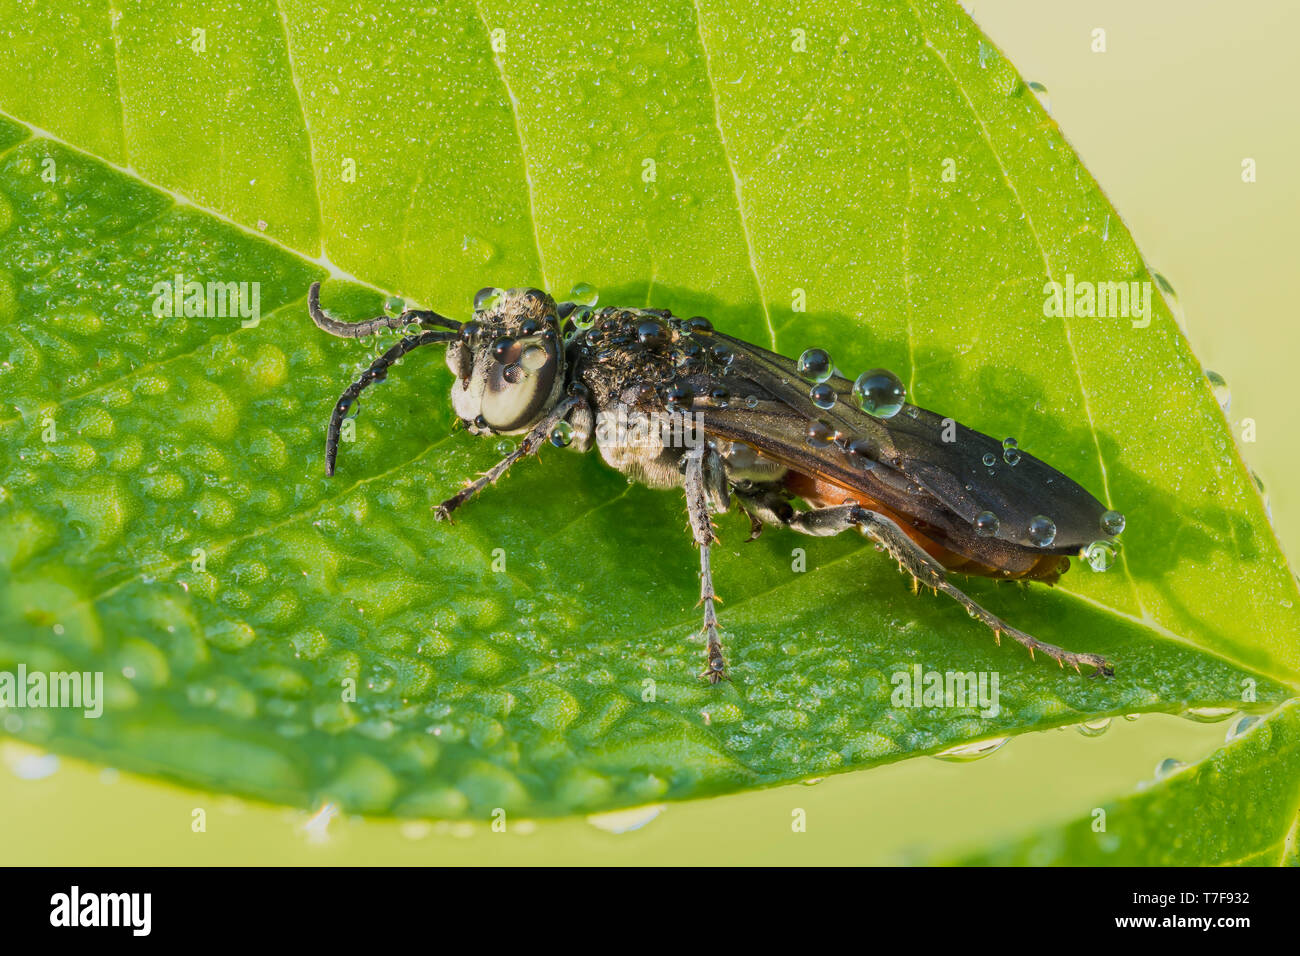 A dew-covered Square-headed Wasp (Larrini), possibly Larra bicolor. Stock Photo